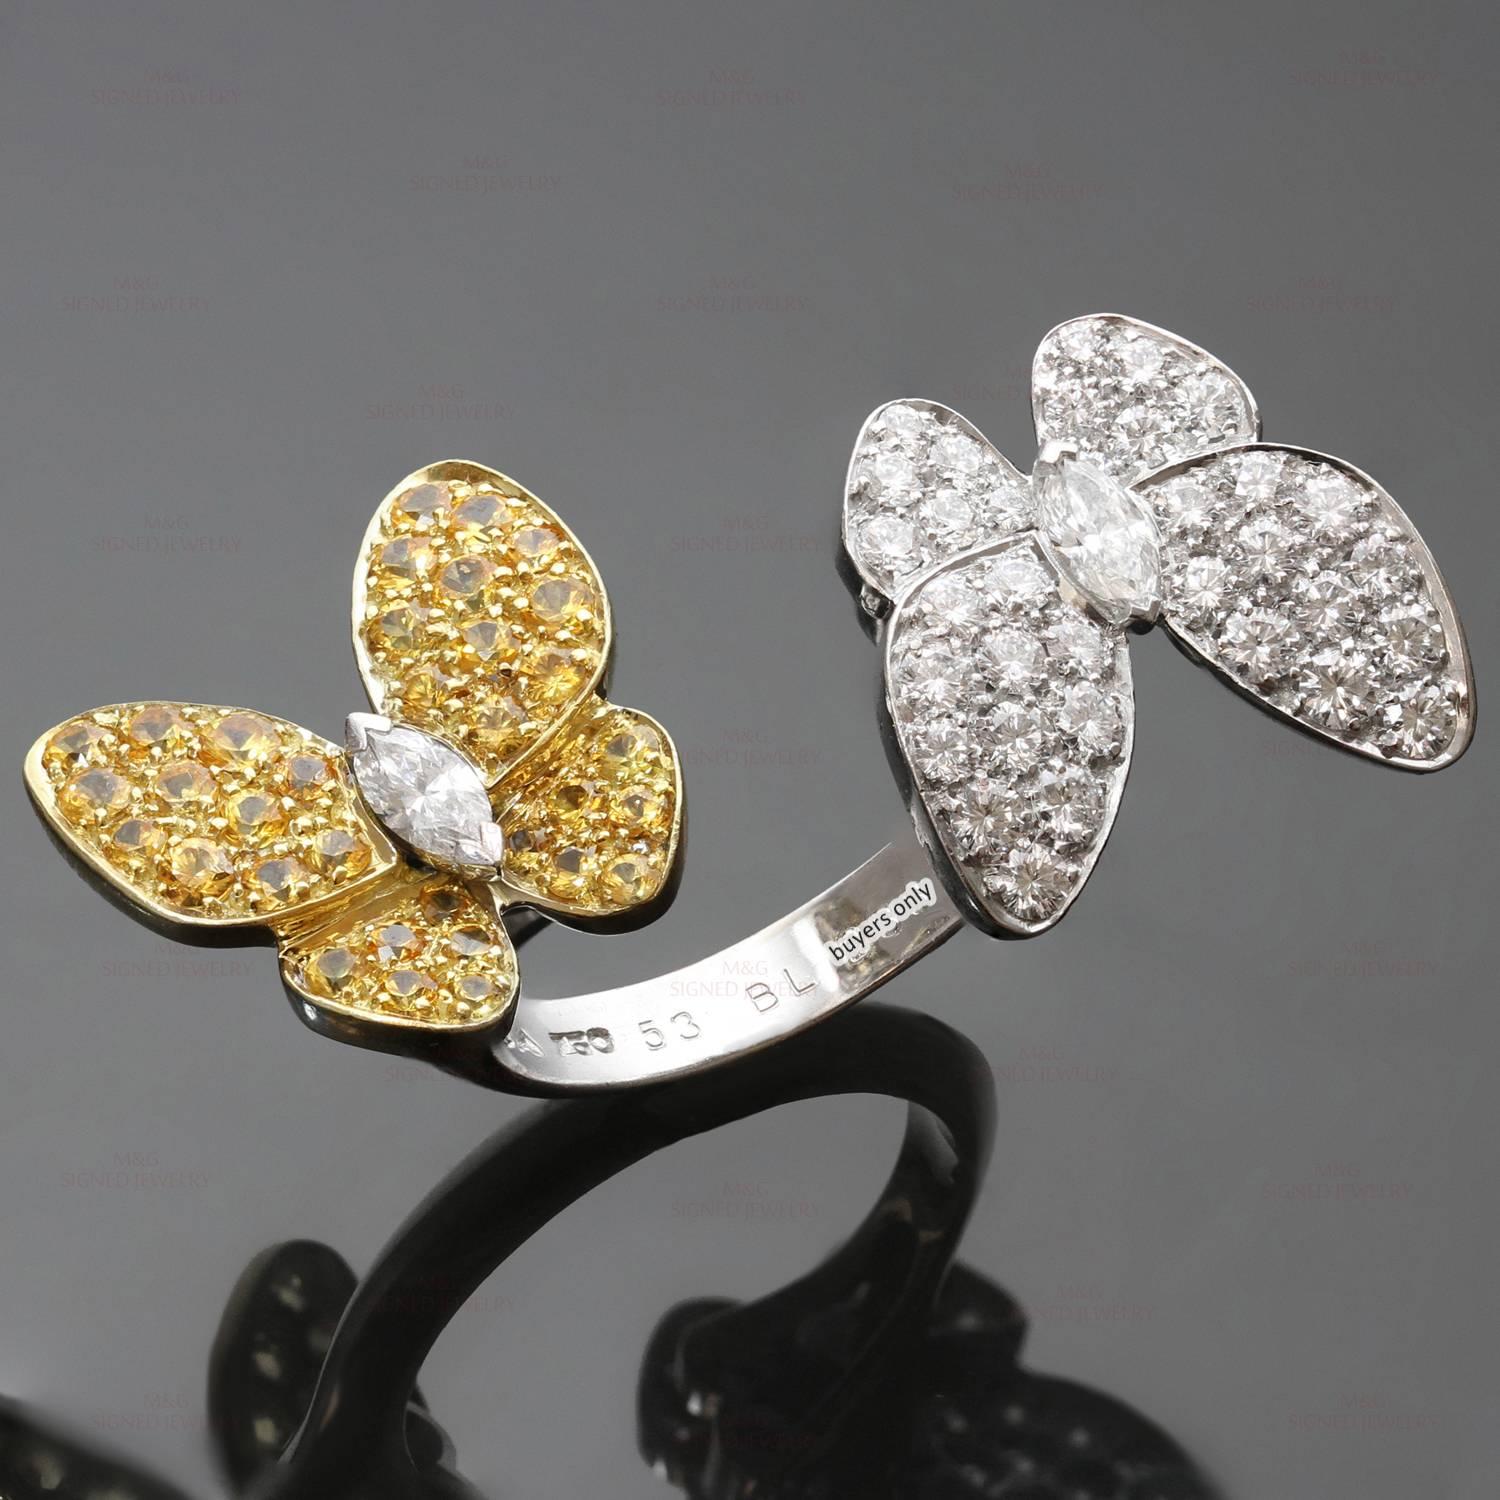 This fabulous Between the Finger ring from Van Cleef & Arpel's Two Butterfly collection is made in 18k white and yellow gold and features a pair of sparkling delicate butterflies fitting perfectly between two fingers in a striking contrast of